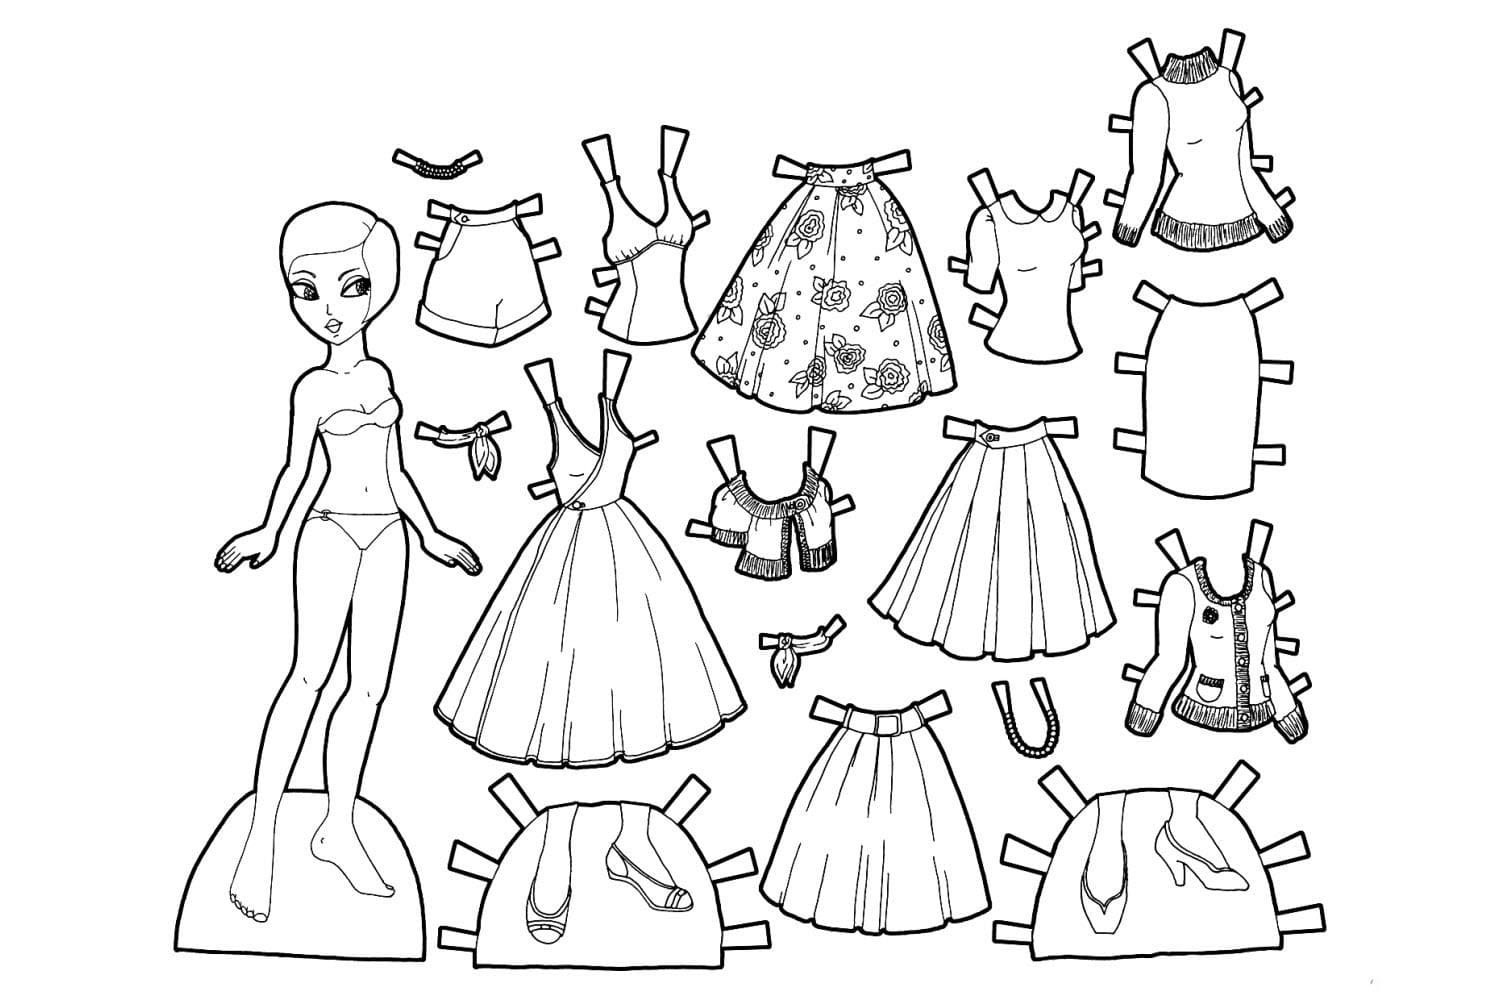 Printable Paper Dolls To Color_51977